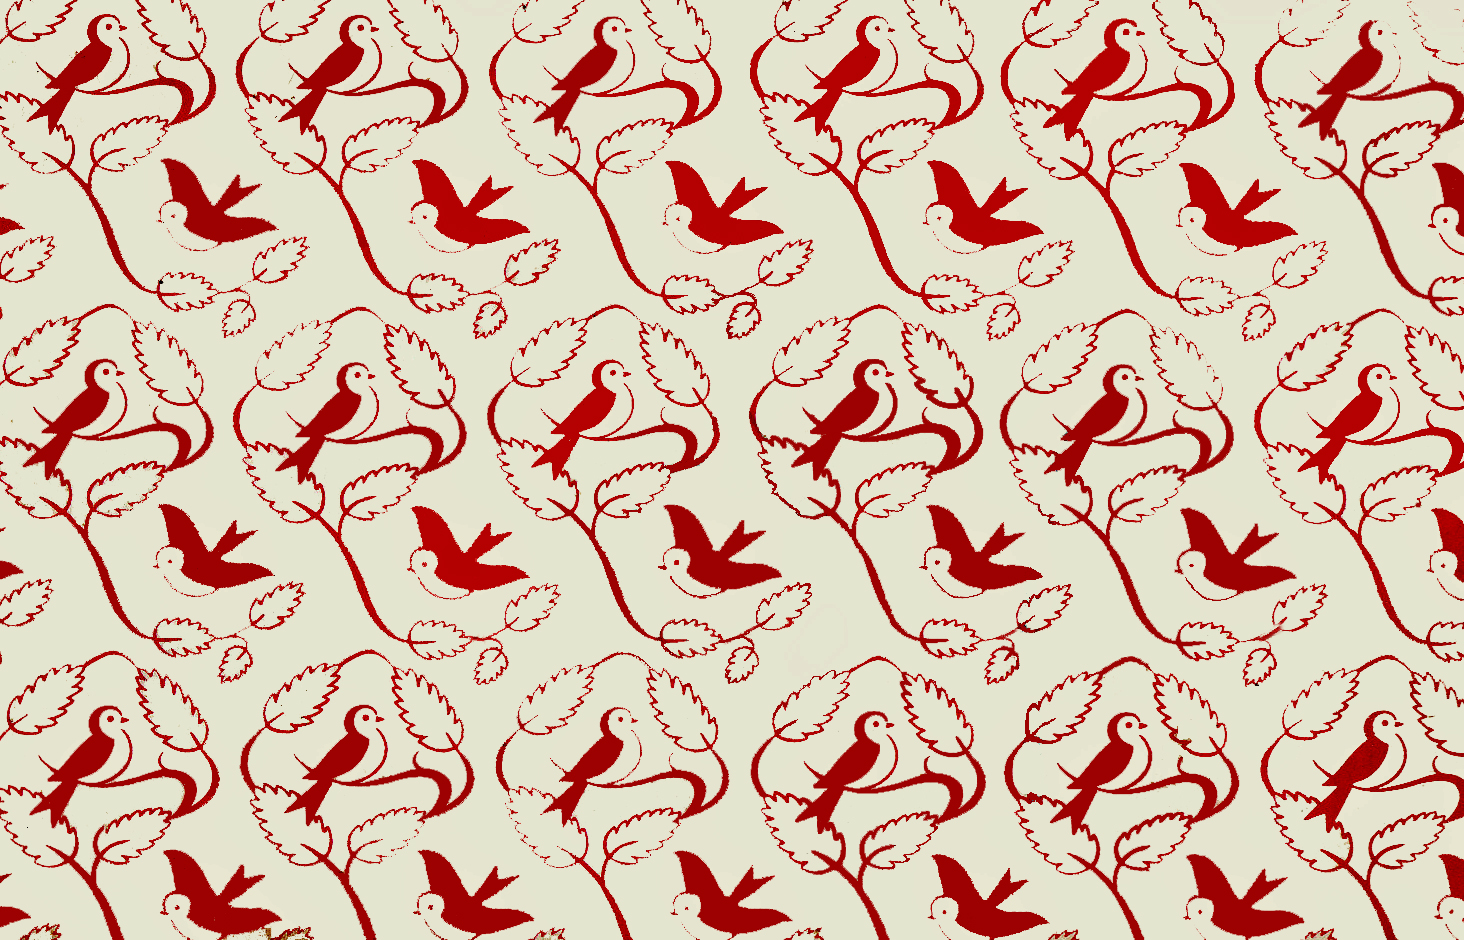 birds and nches in red against a white background